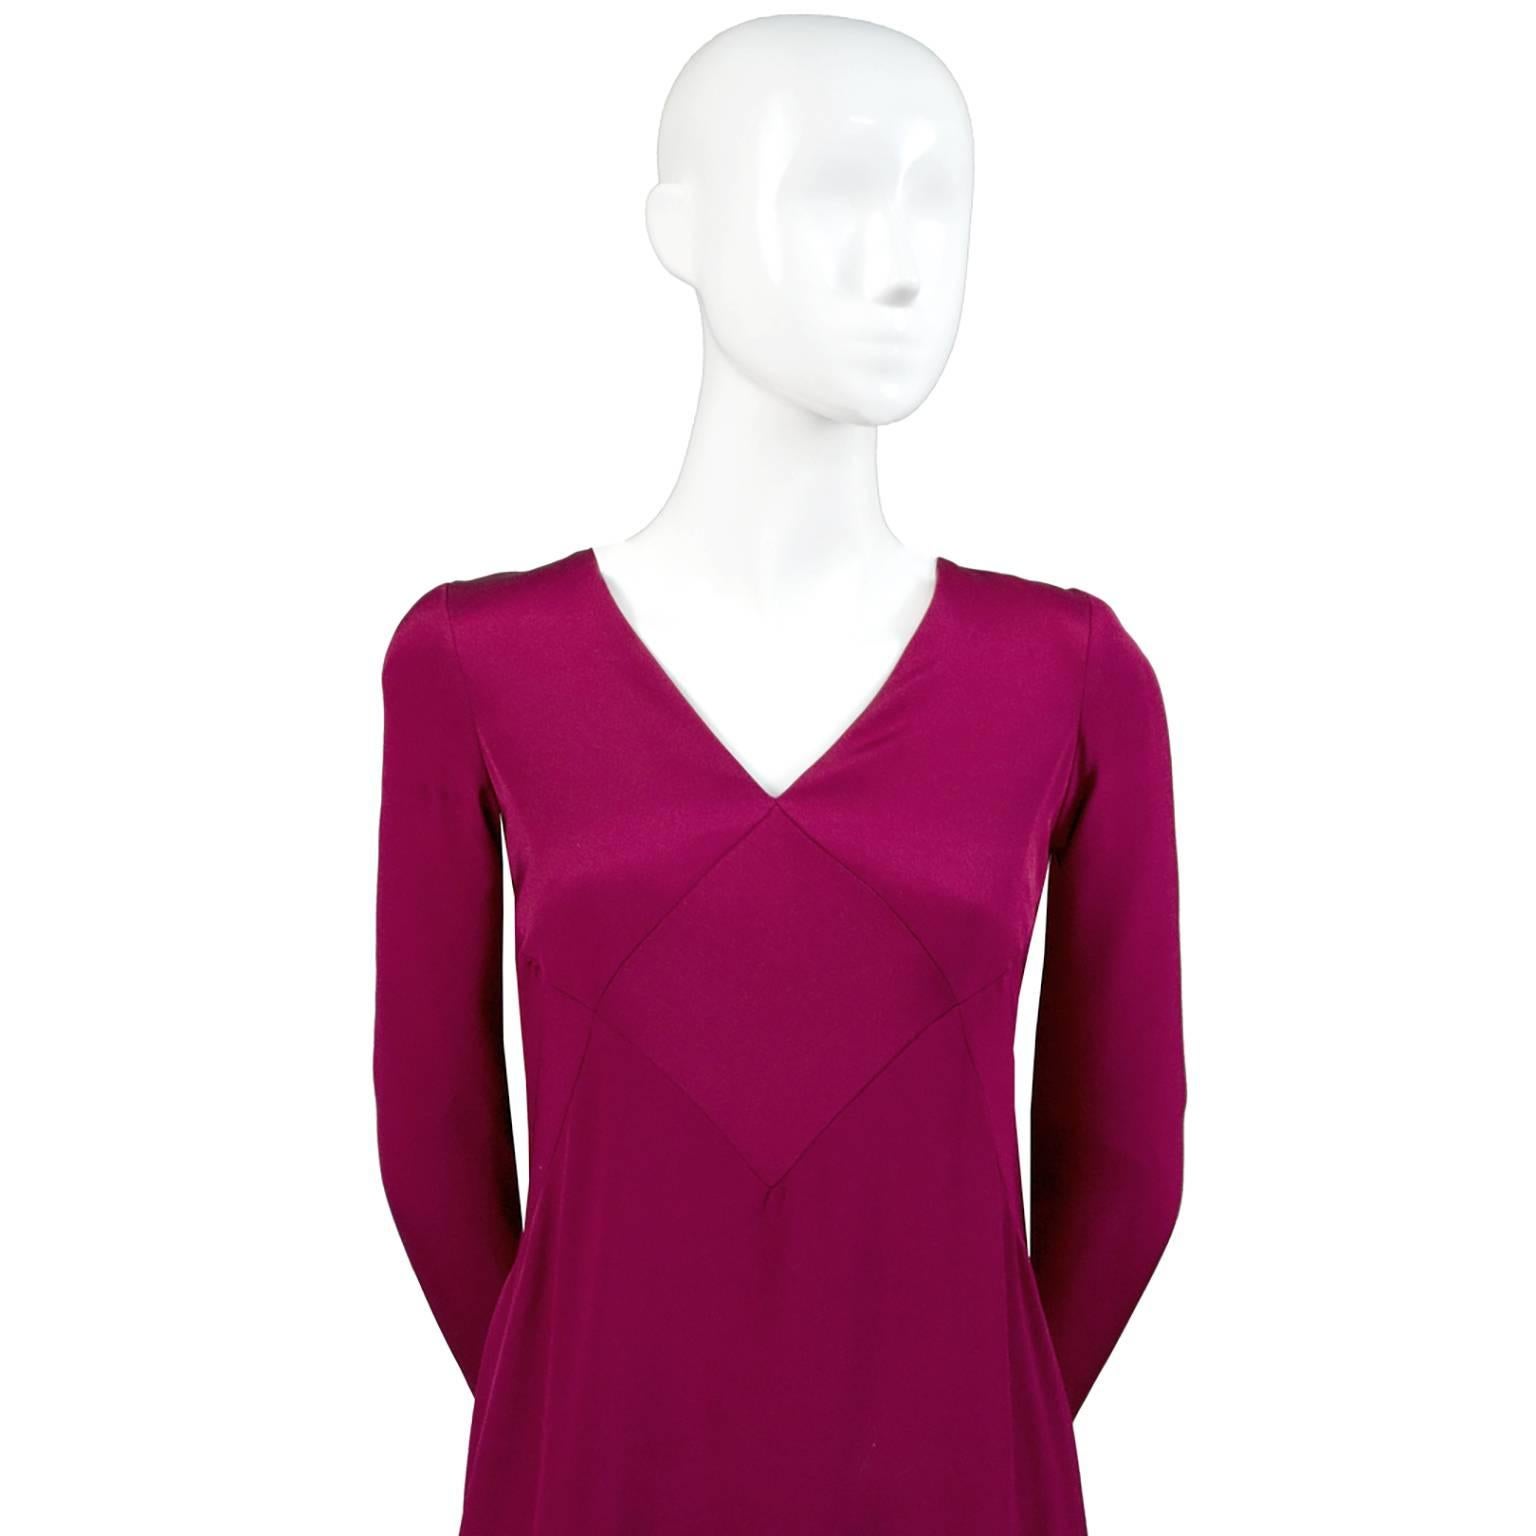 This is a full length silk jersey dress from Oscar de la Renta in a gorgeous shade of a rich berry red.  The dress was purchased at Saks Fifth Avenue in the 1990s.  This dress has an empire waist with nice detail and deep V neckline. There is a back